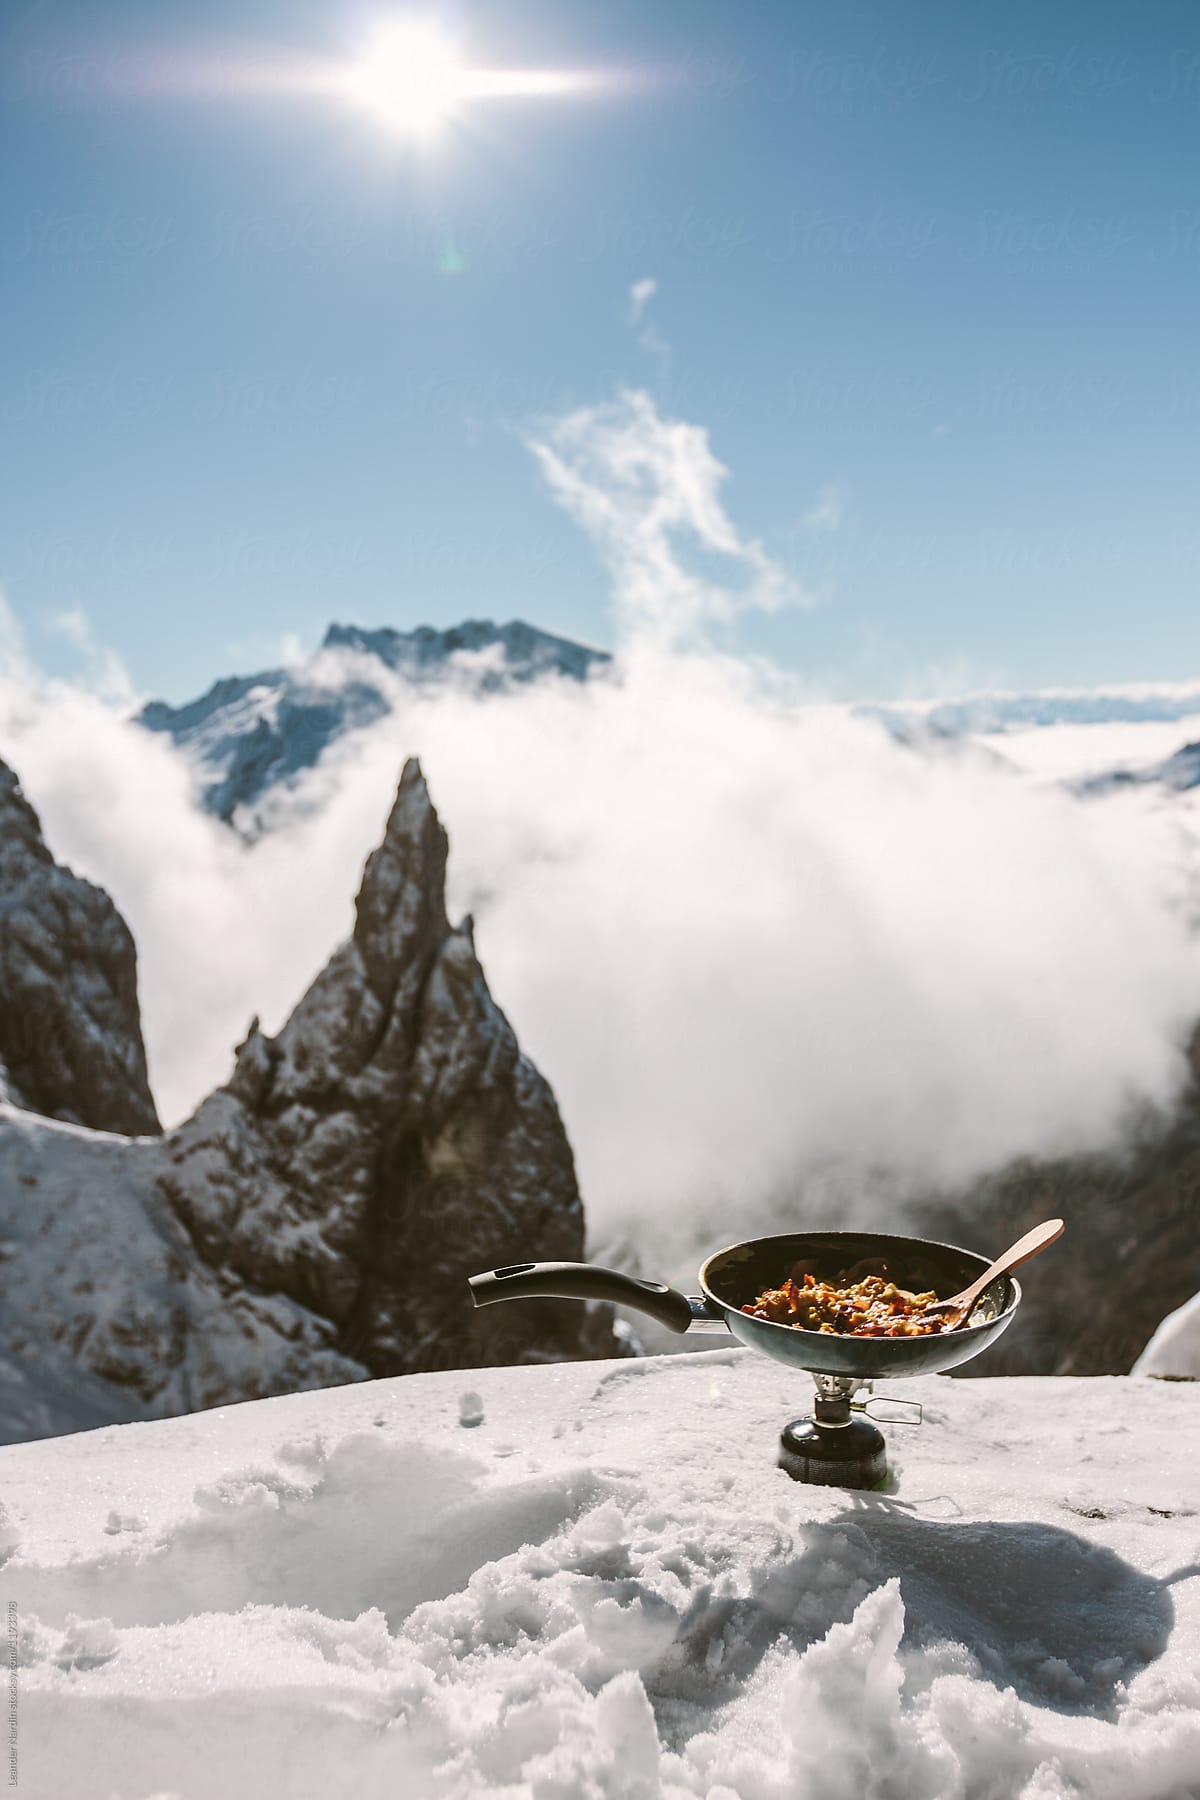 scrambled eggs on a gas cooker in snowcovered mountain scenery